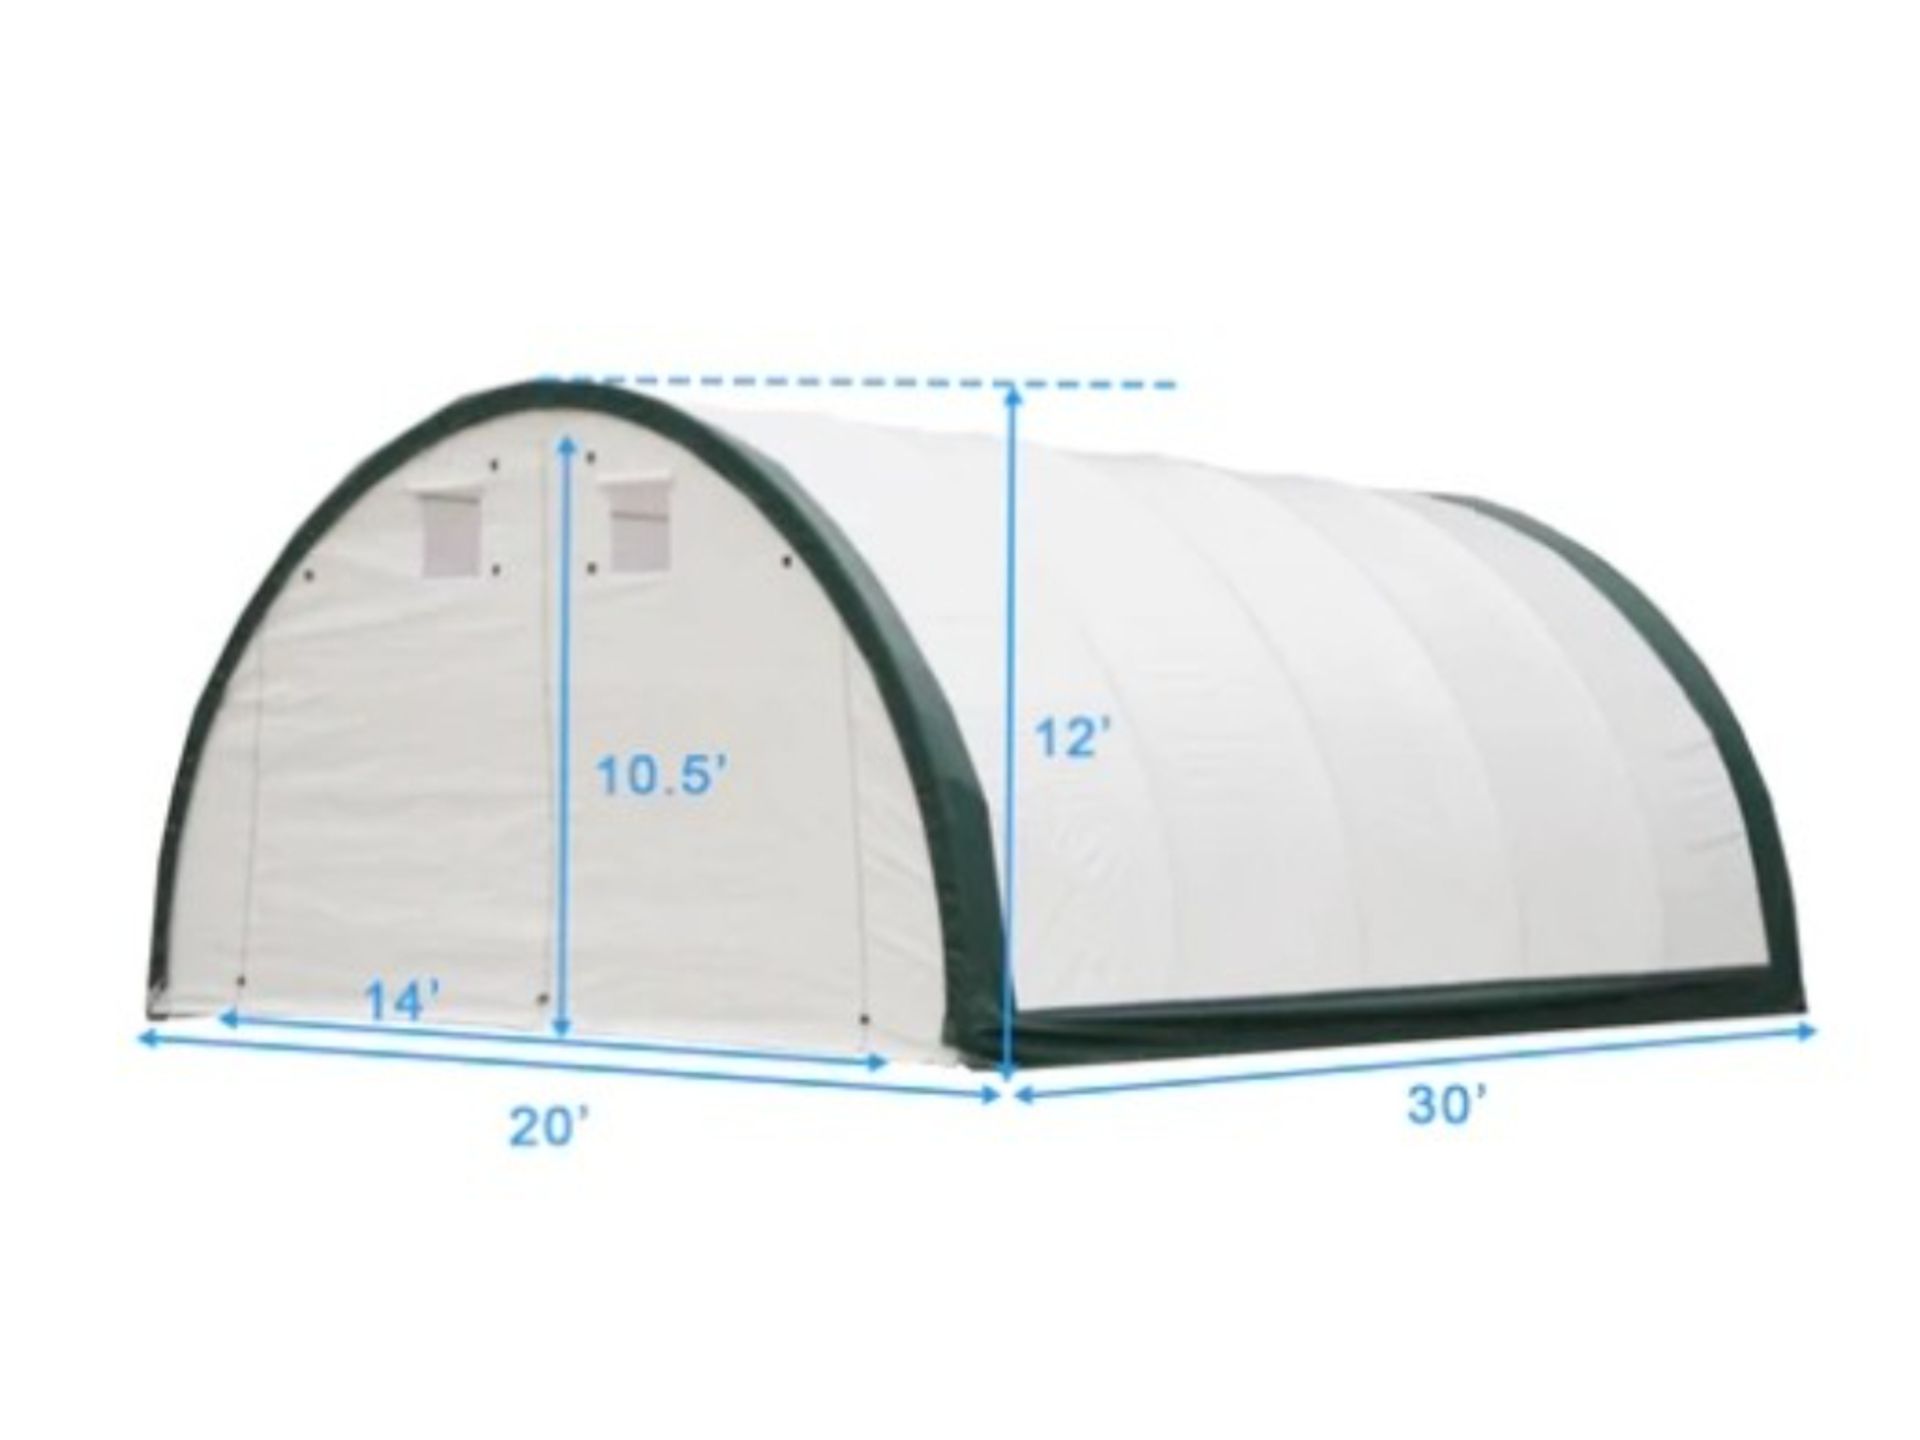 20' x 30' x 12' Dome Shelter - Image 4 of 6